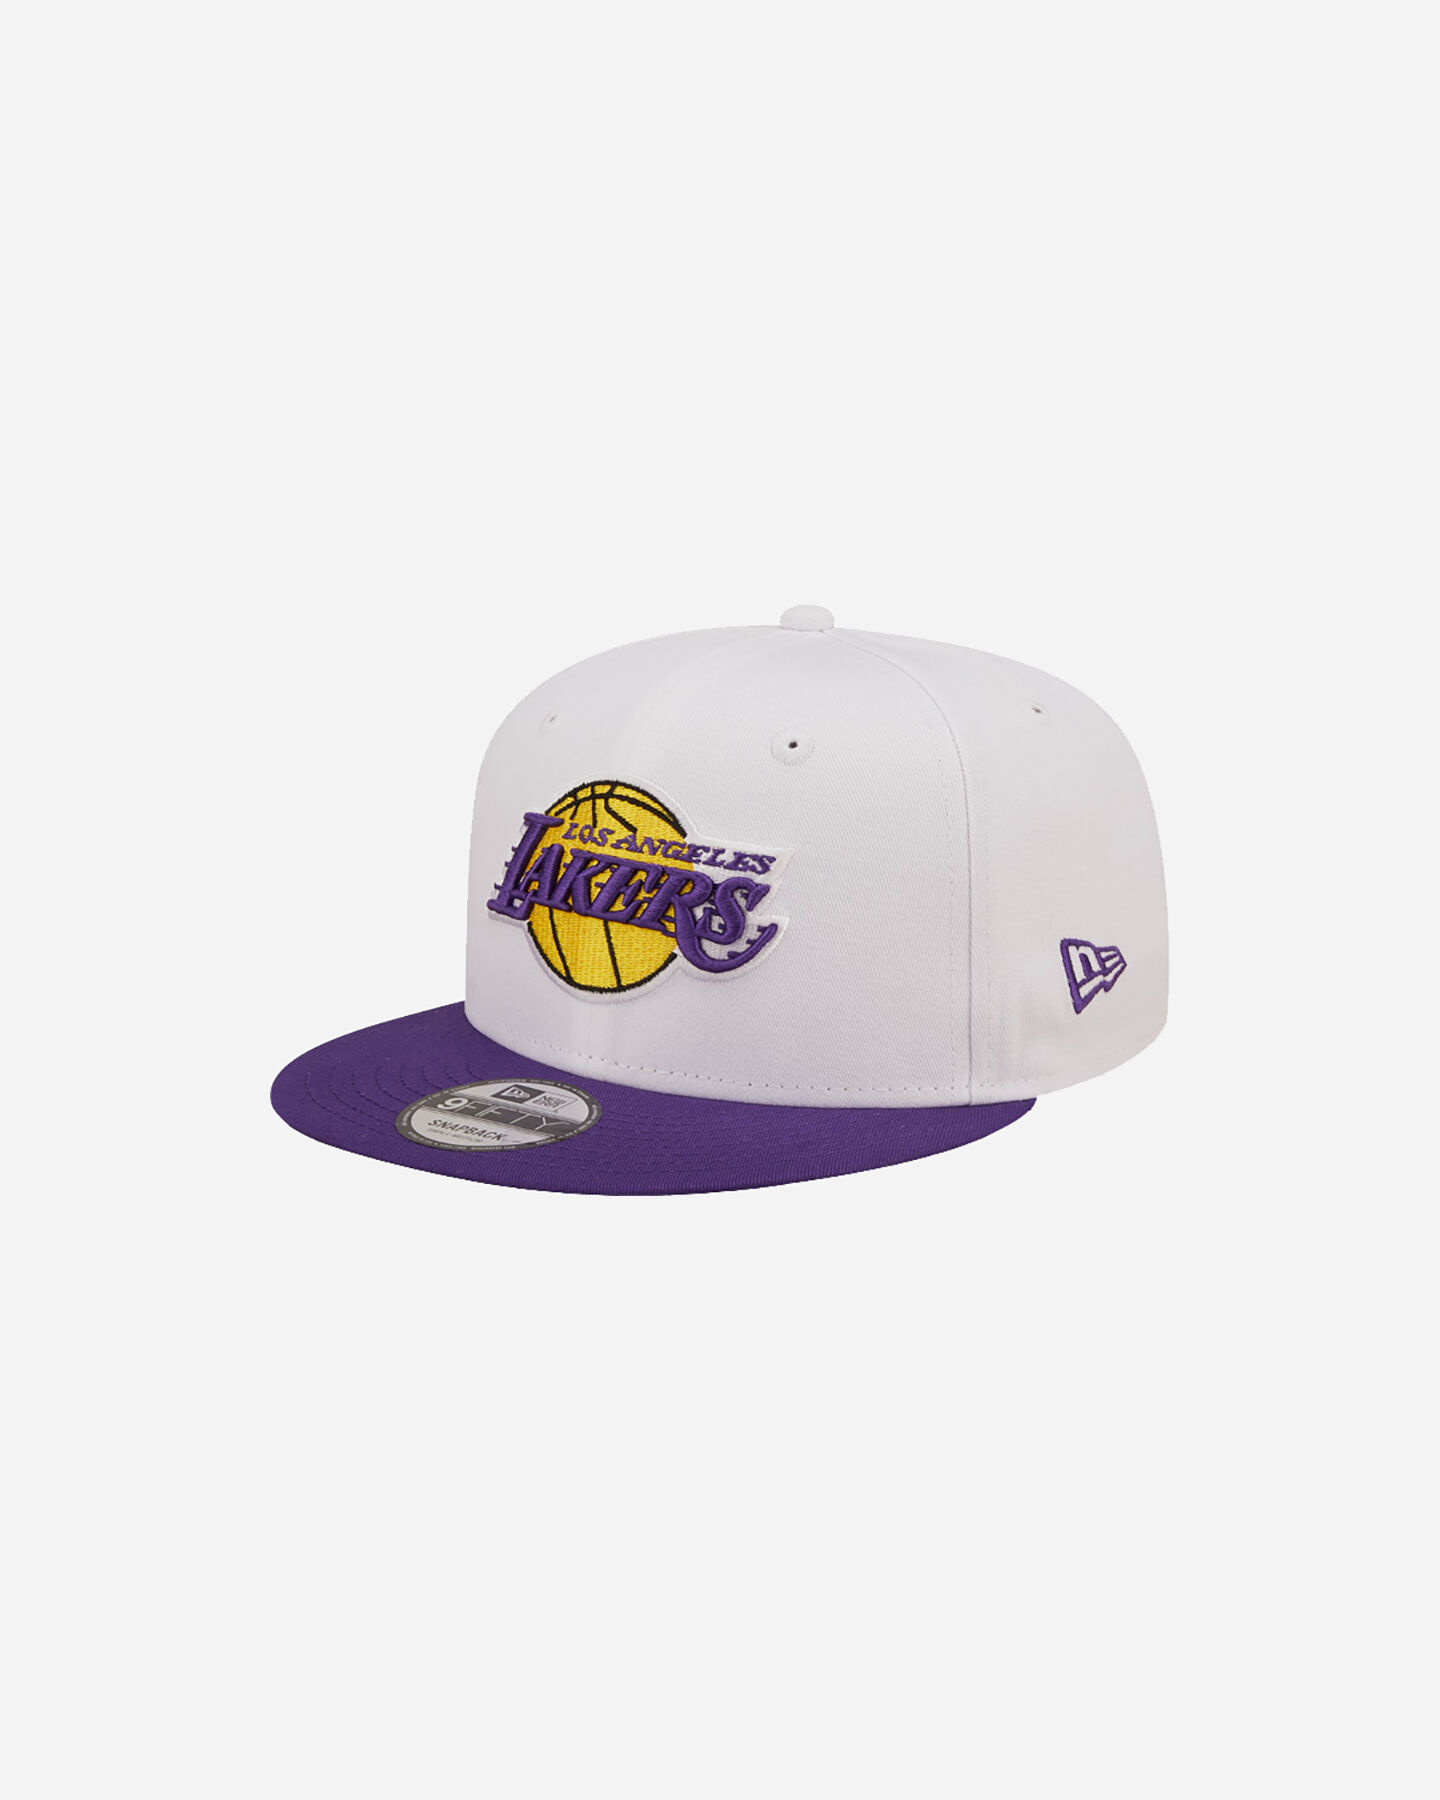  Cappellino NEW ERA 9FIFTY CROWN TEAM LOS LAKERS  S5571083|100|SM scatto 0